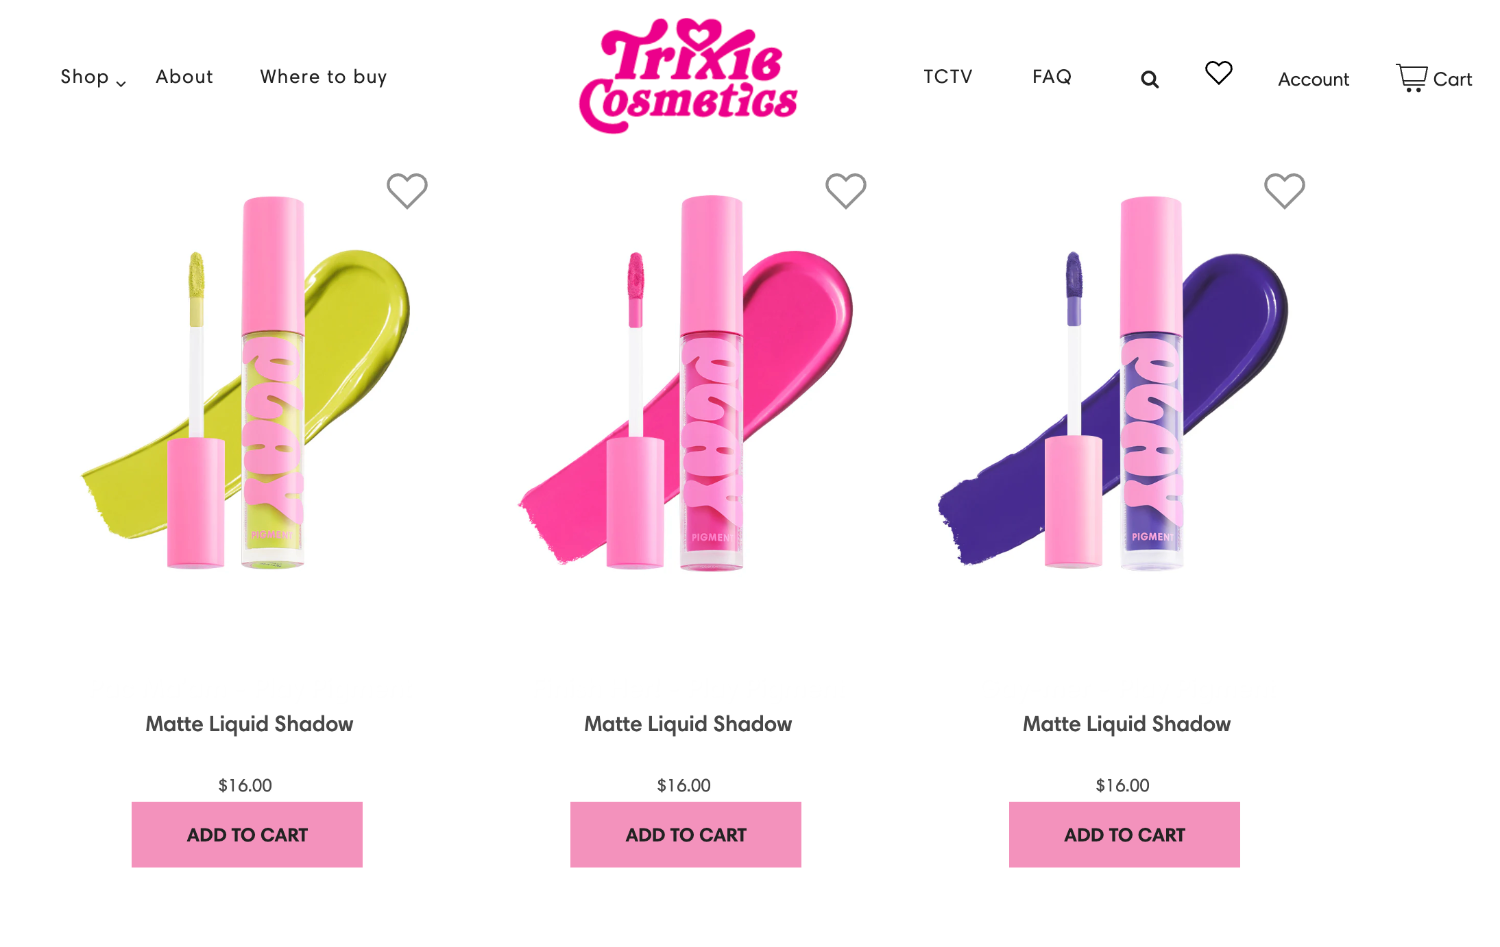 Ecommerce product page for Trixie Cosmetics